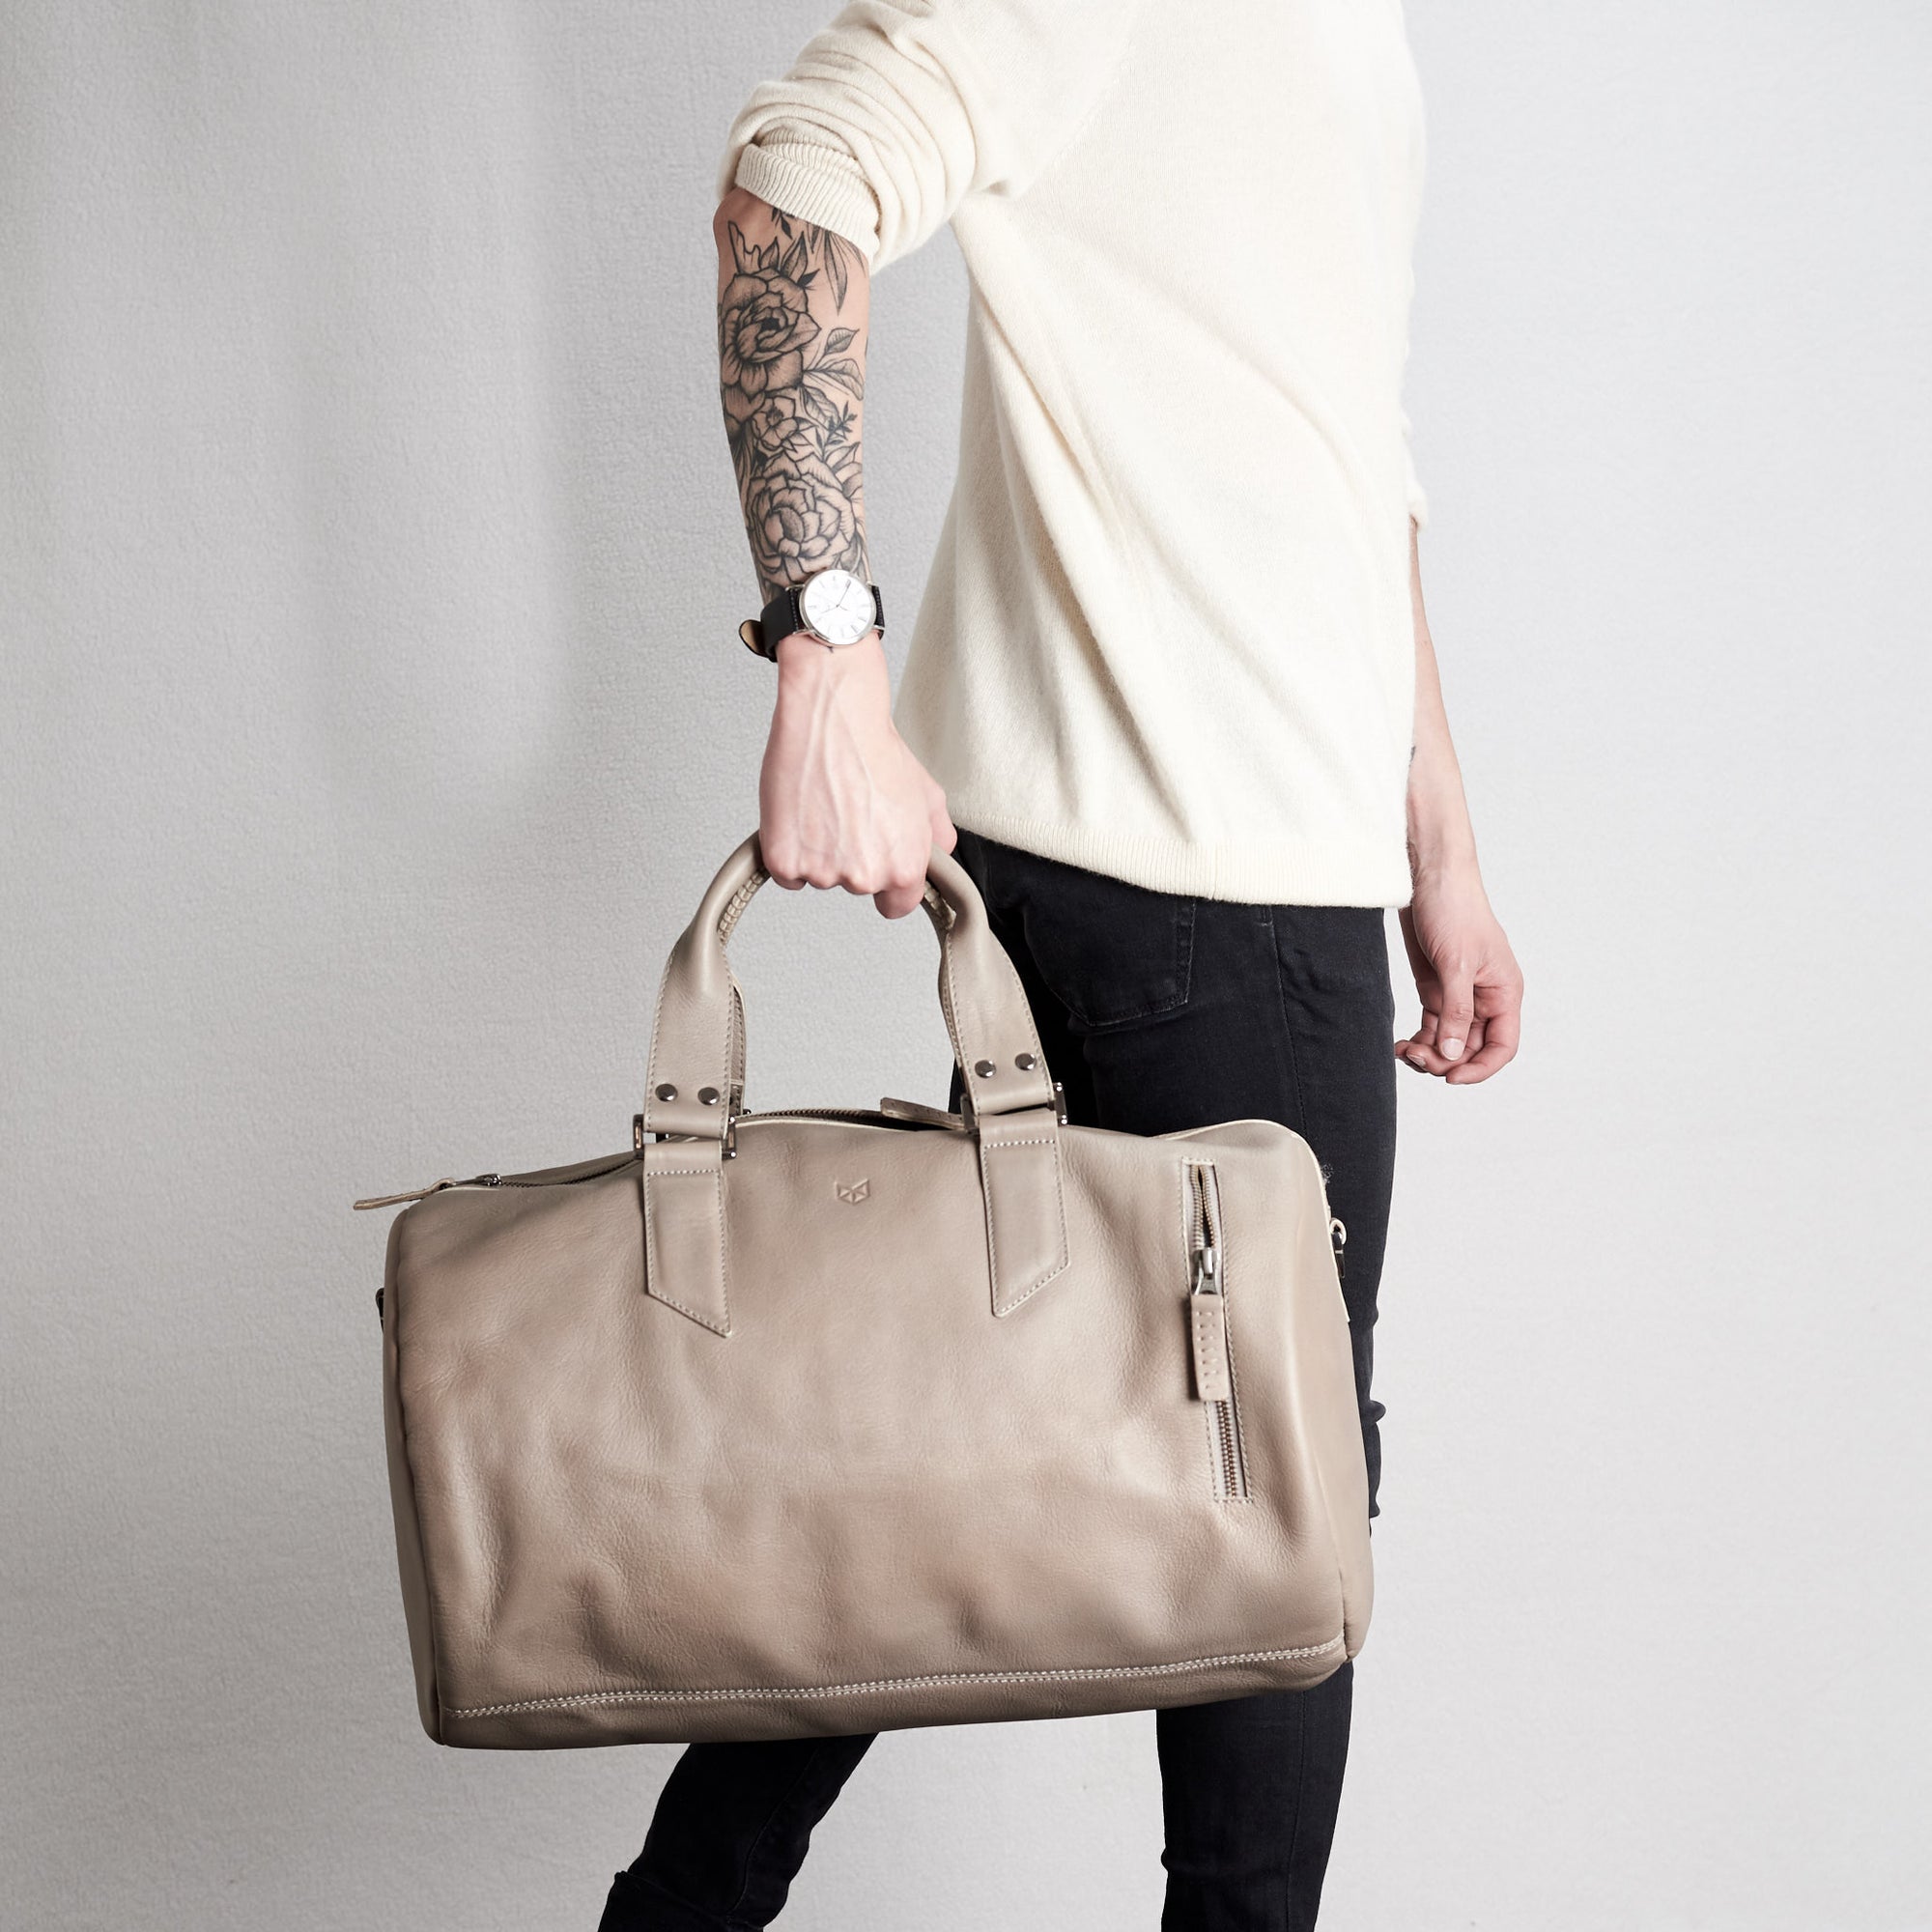 Style handles holding. Substantial grey duffle bag by Capra Leather. 